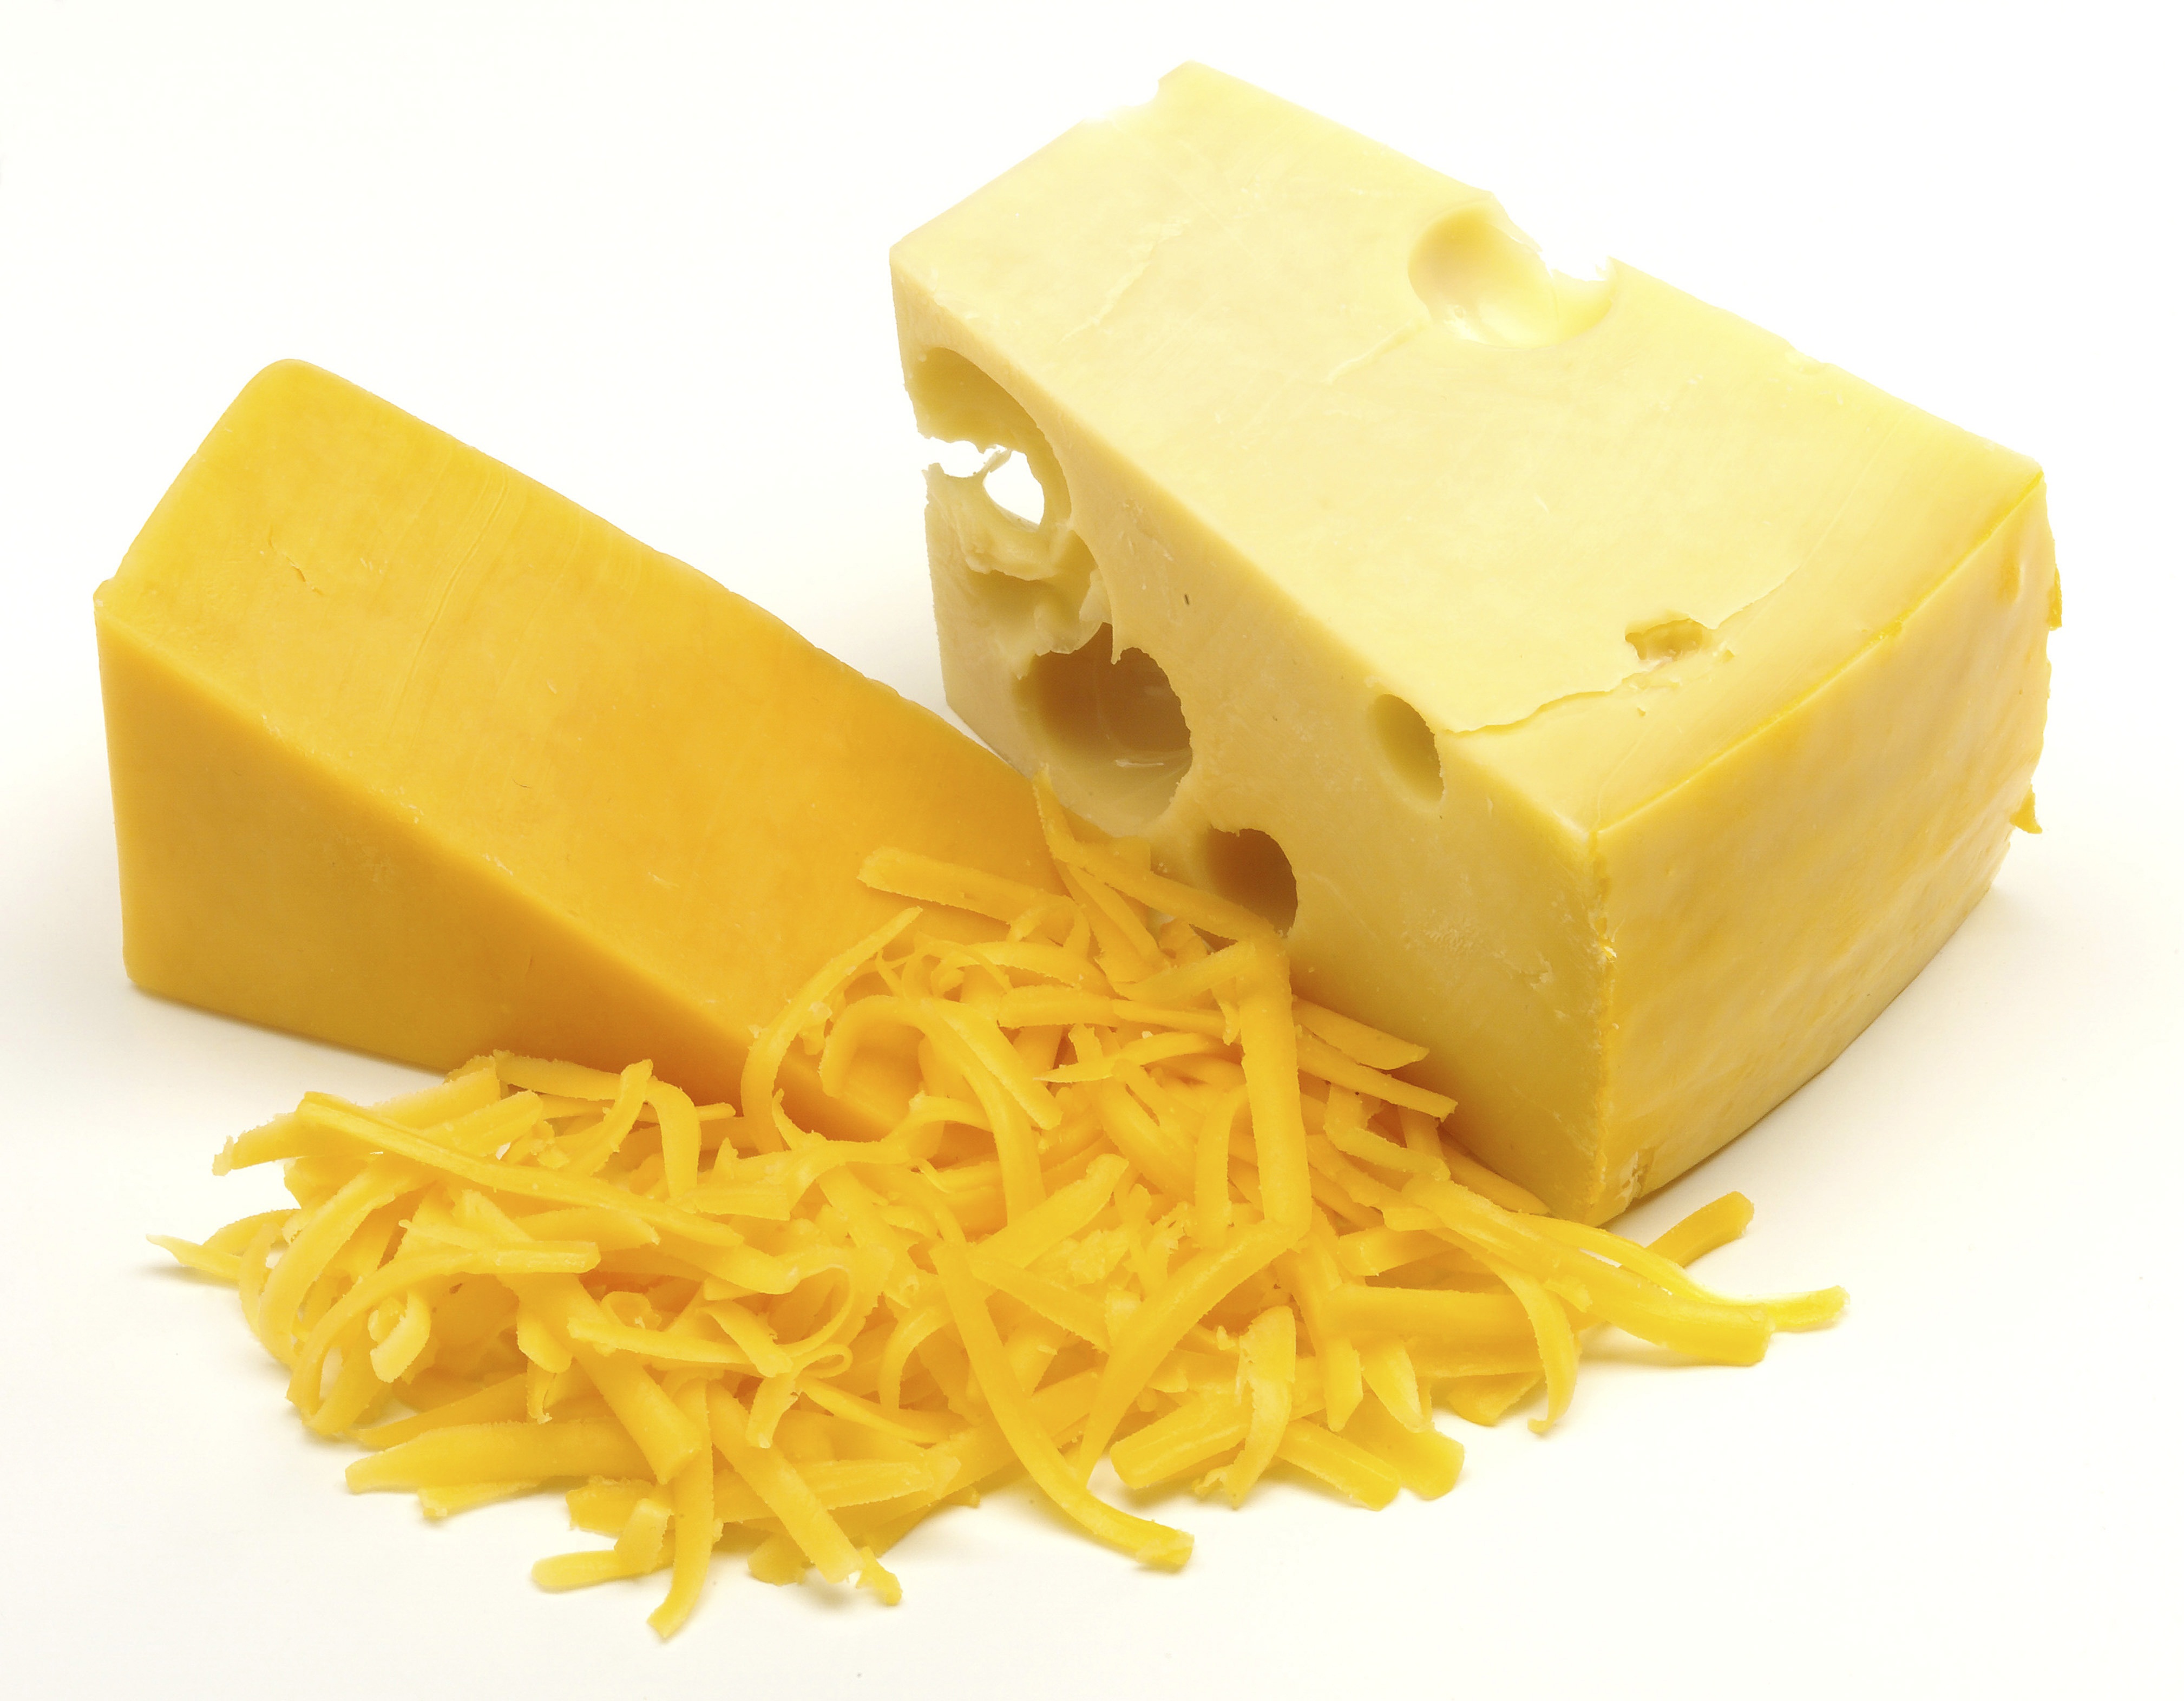 grating cheese clipart